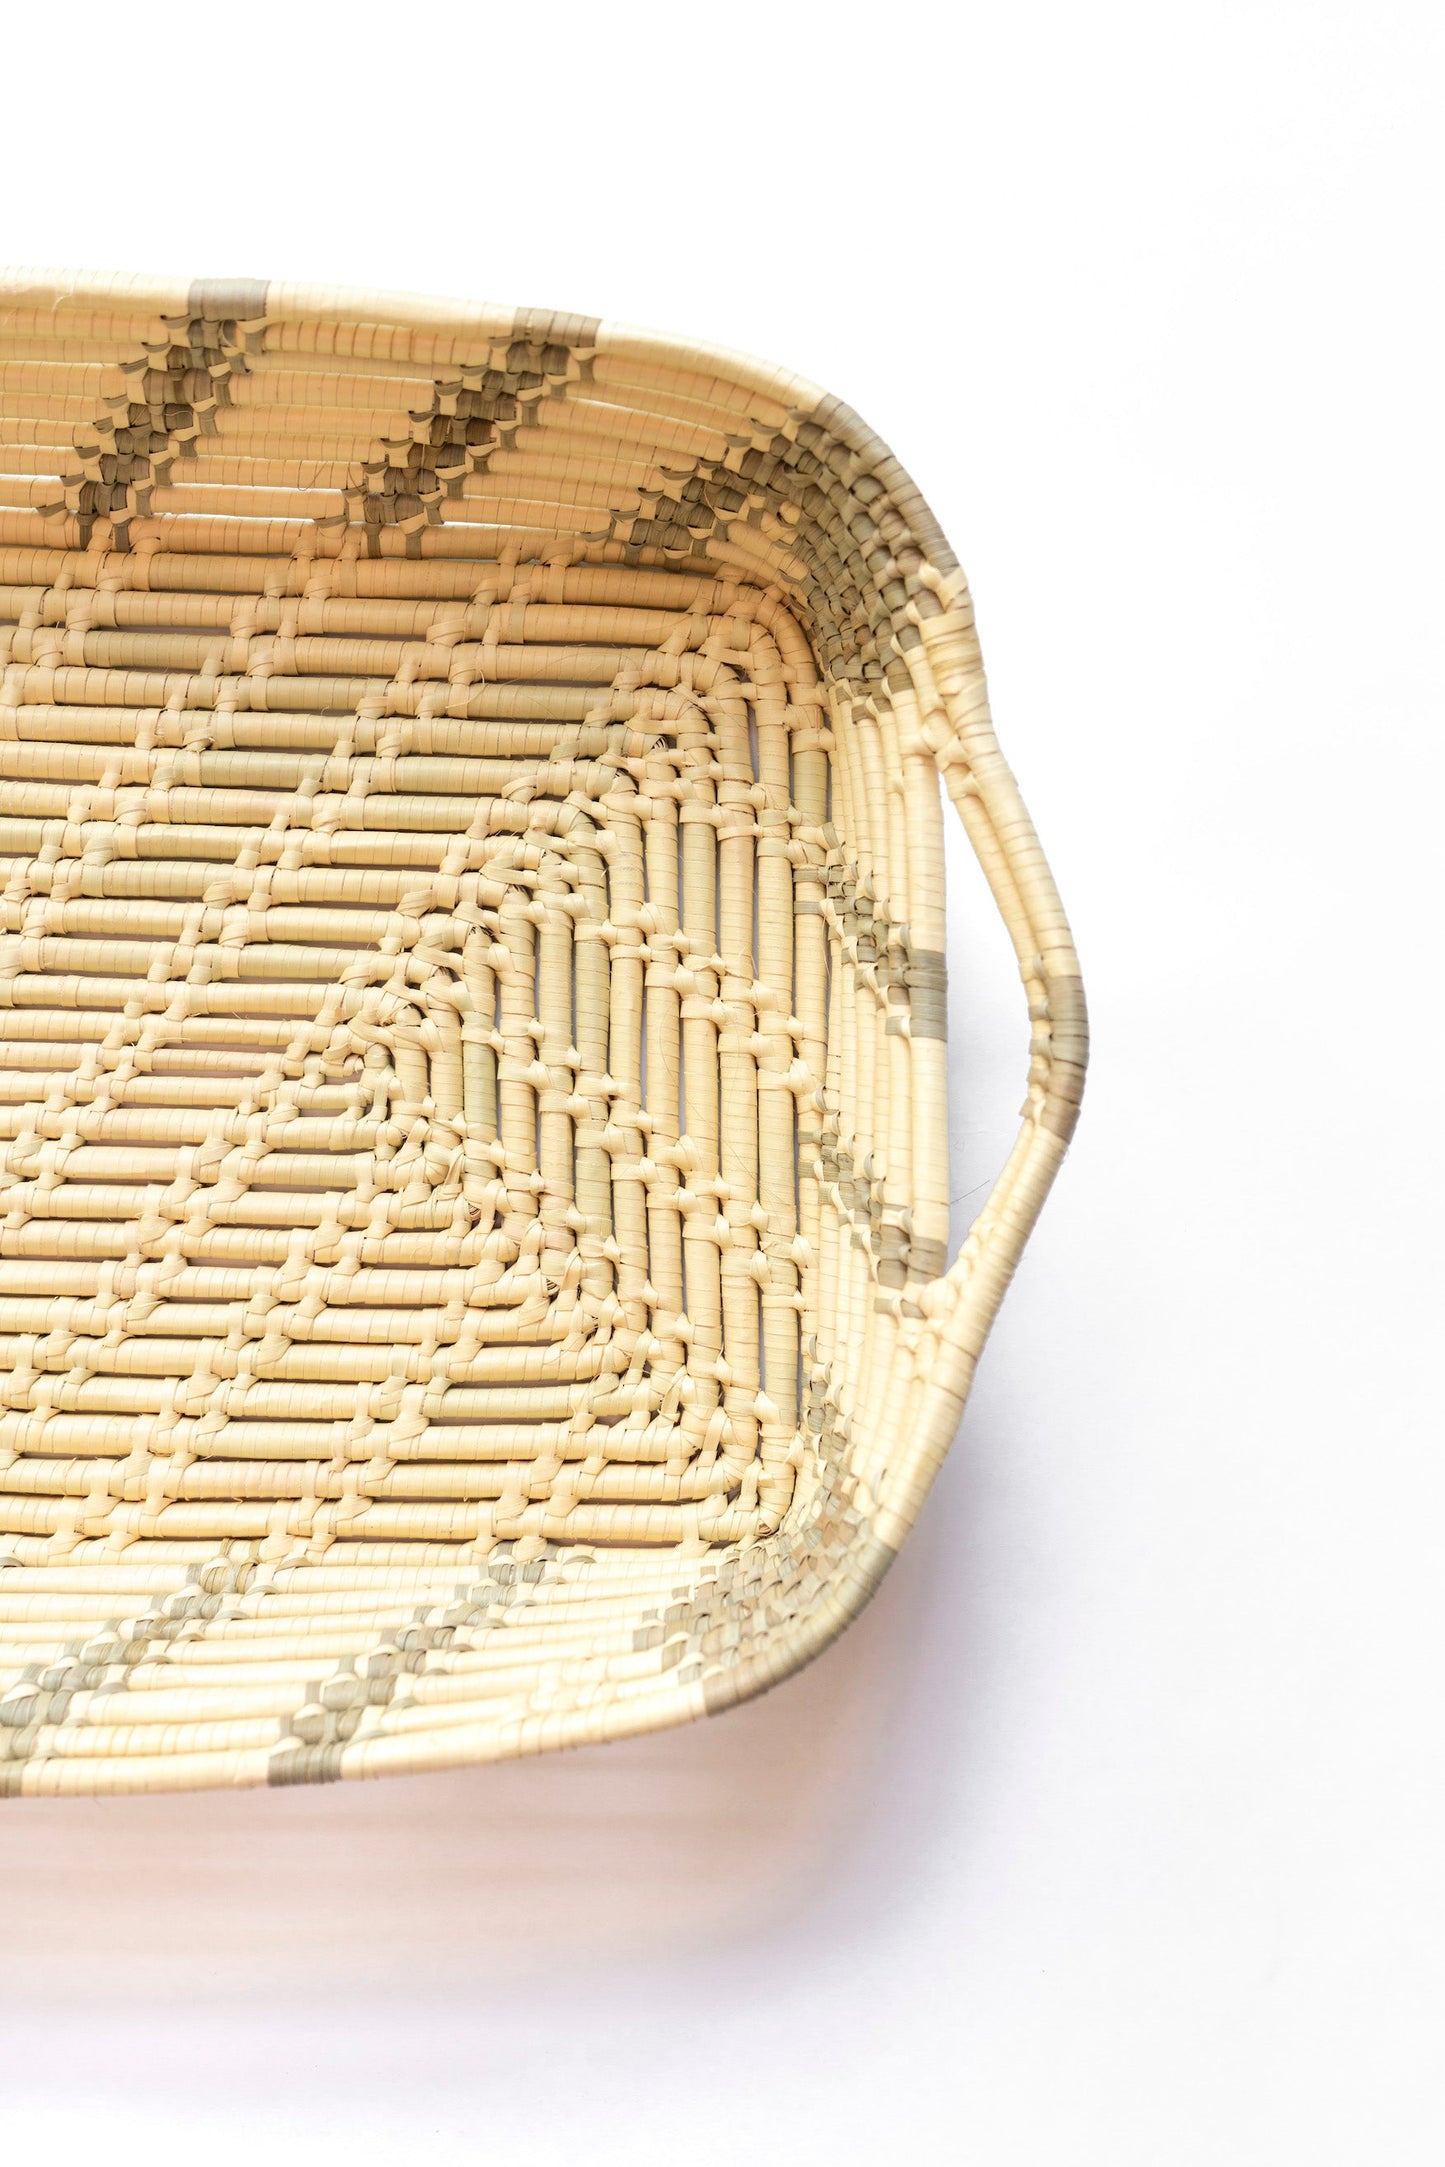 
                  
                    Basket Tray by 2nd Story Goods
                  
                